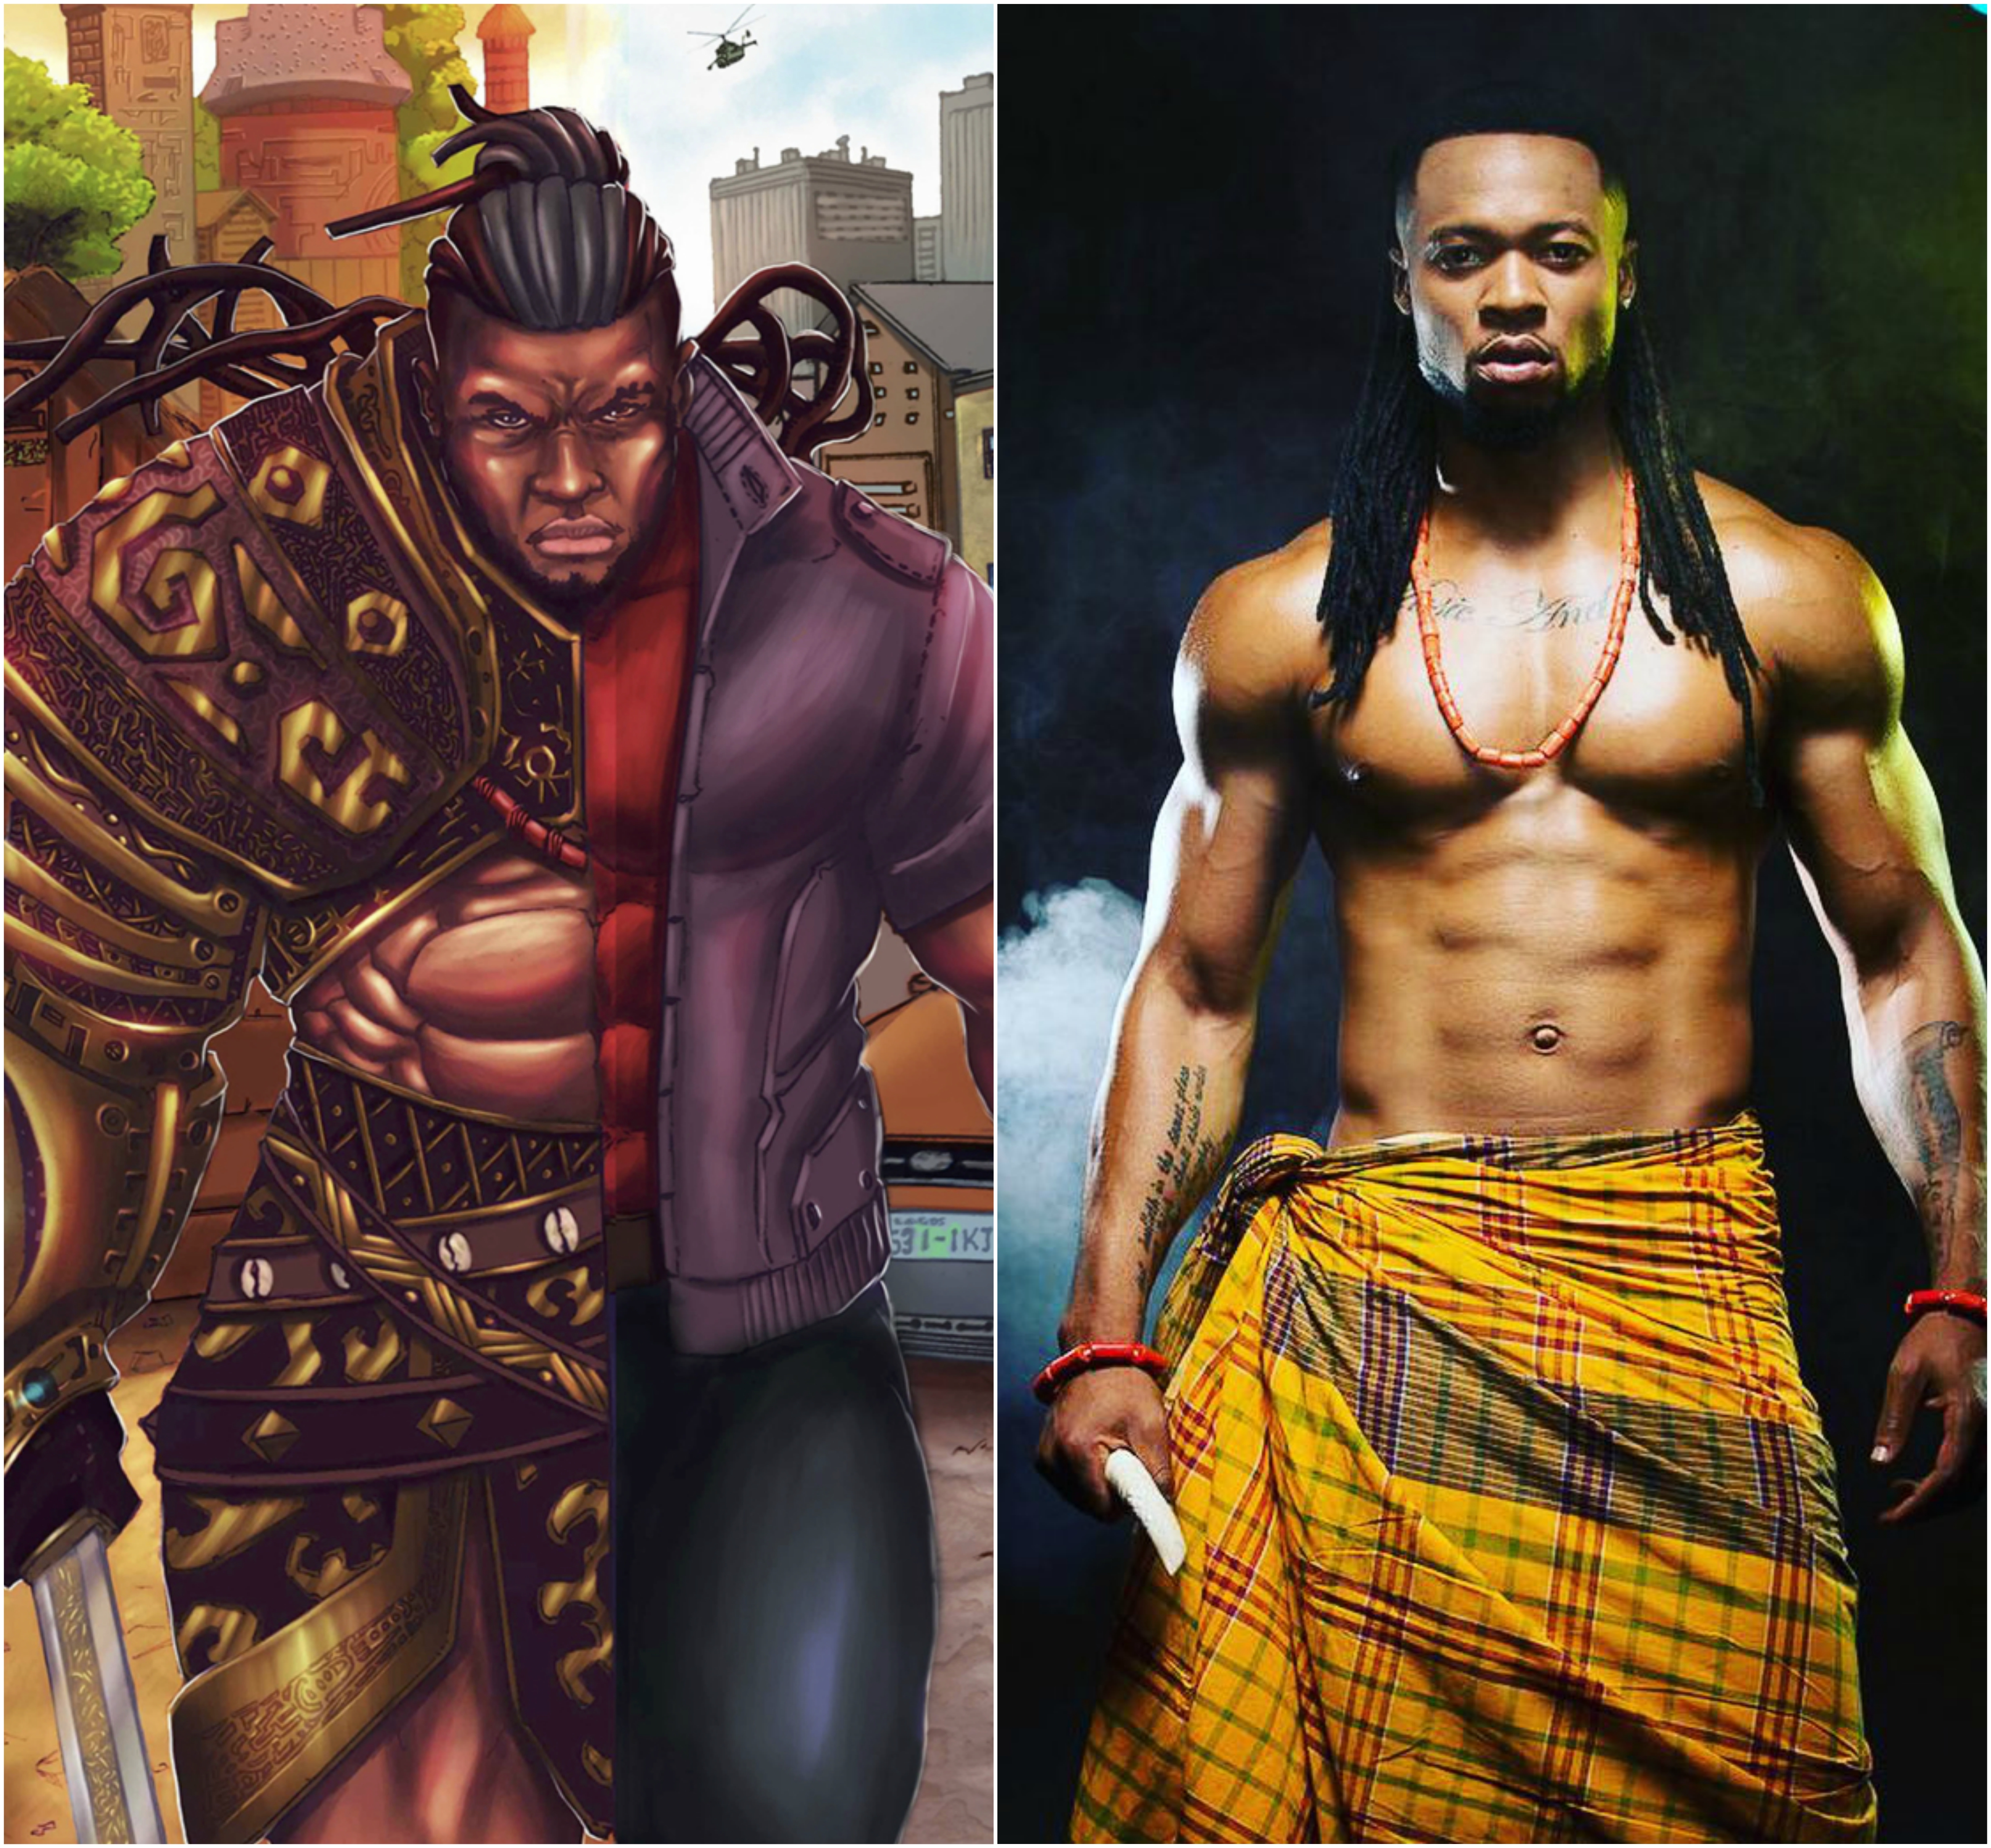 Alaric and Flavour side by side comparison in this African comic book, Scion: Immortal.